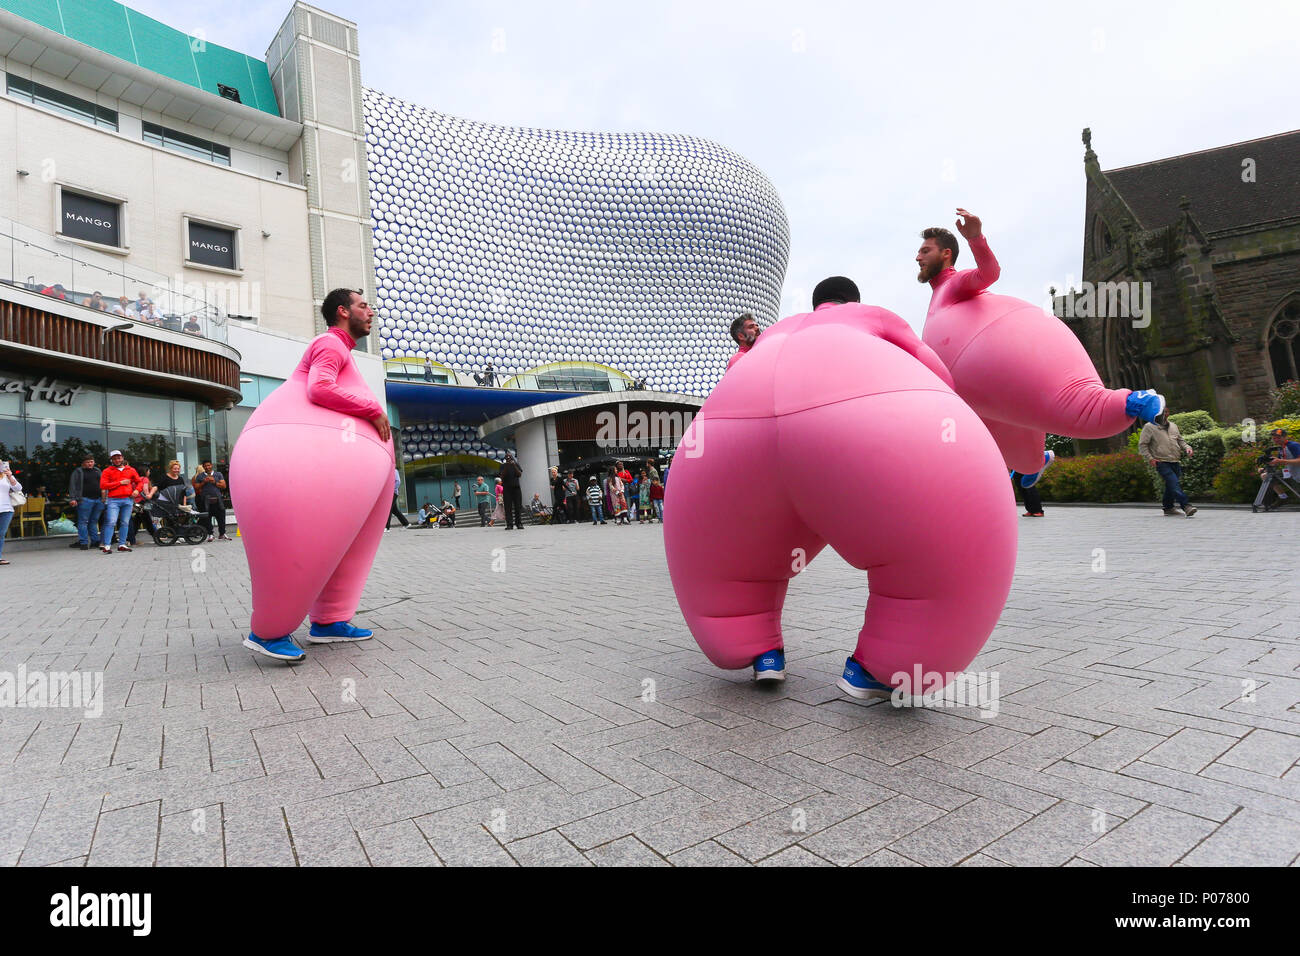 As part of Birmingham International Dance Festival, the French dance group Compagnie Didier Theron perform La Grande Phase through the city centre of Birmingham among the crowds of shoppers. The dancers wear inflated latex costumes to enhance the feeling of weightlessness and to magnify their balletic movements. Peter Lopeman/Alamy Live News Stock Photo